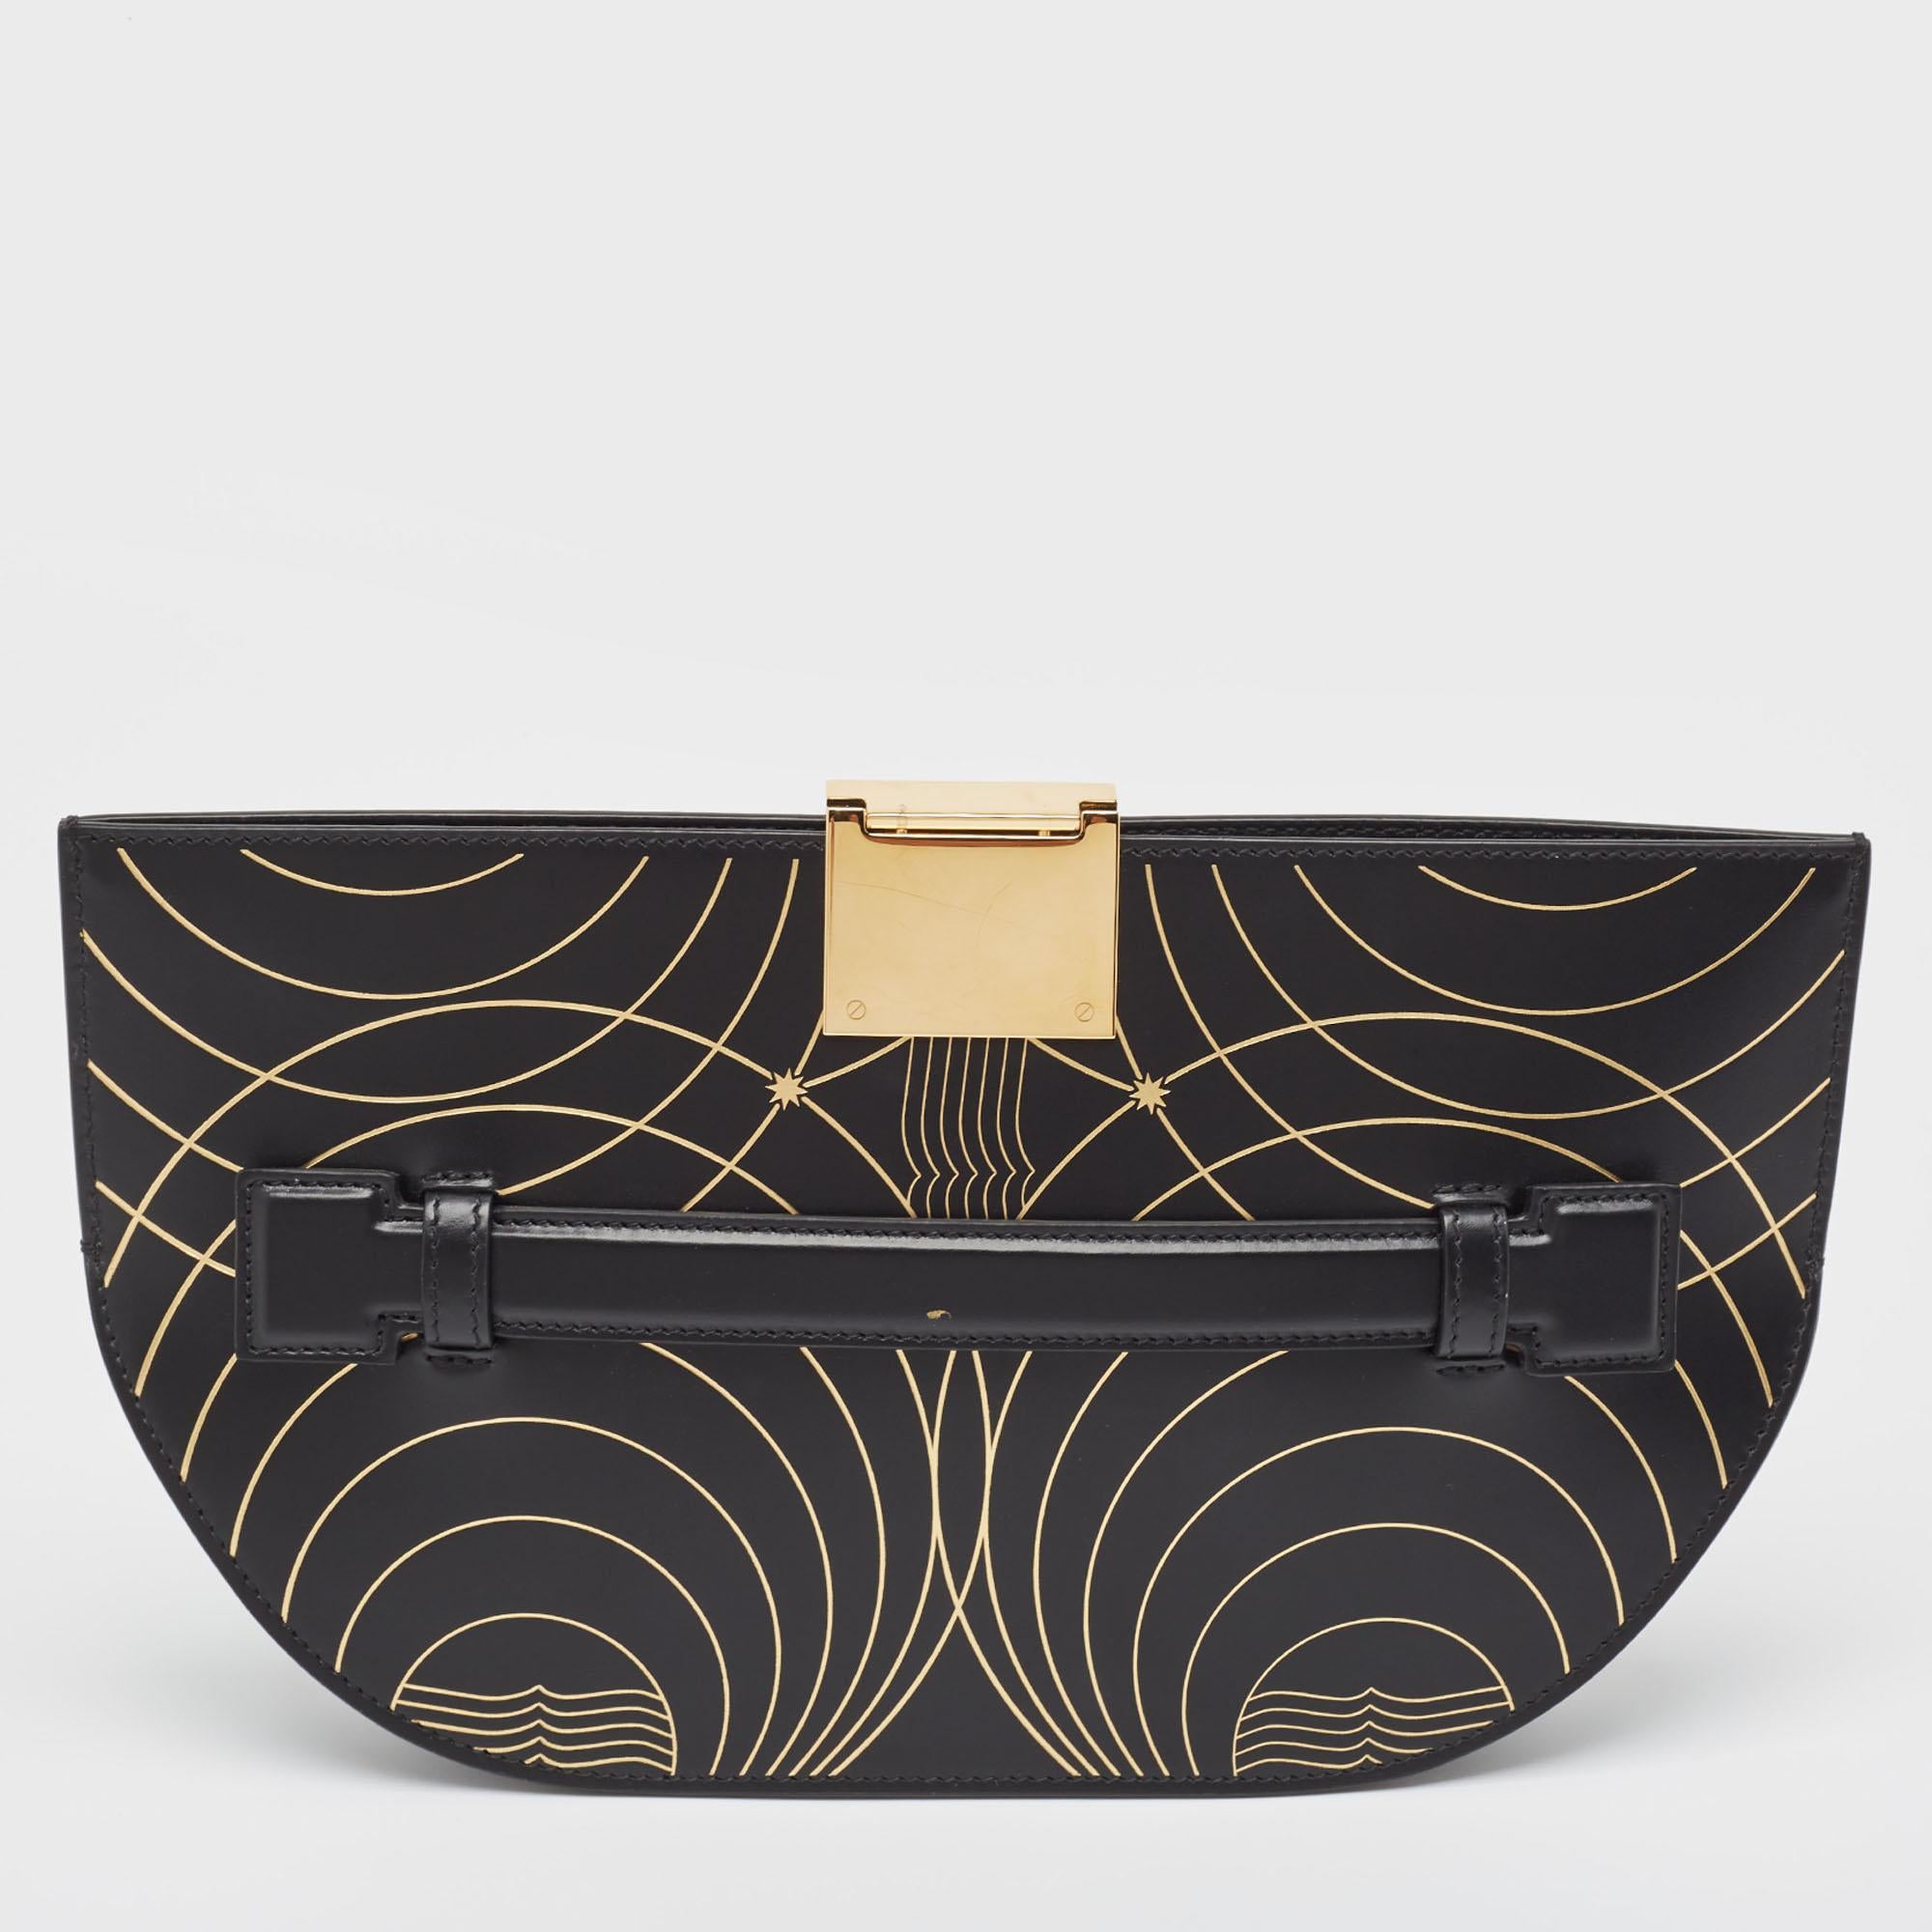 Burberry Black/Gold Printed Leather Olympia Wristlet Clutch For Sale 4